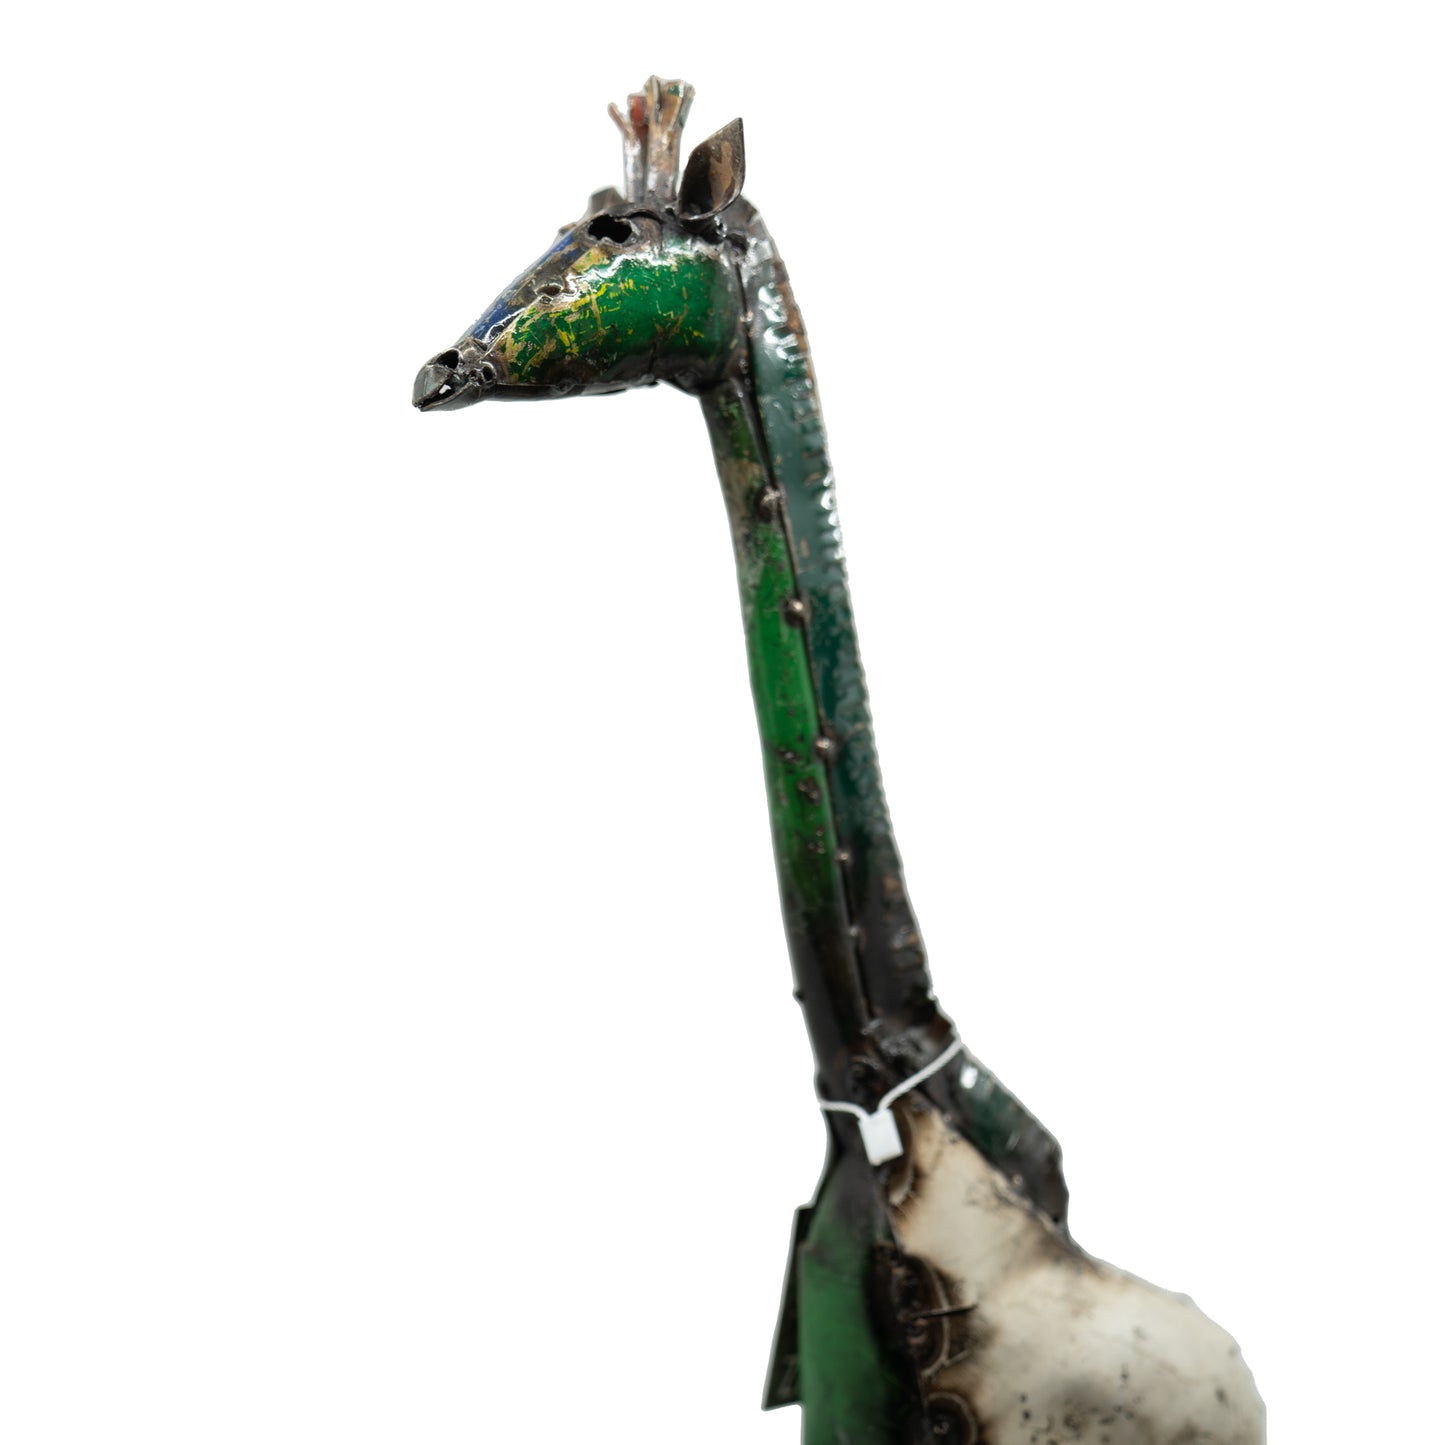 Colorful Recycled Oil Drum Giraffe